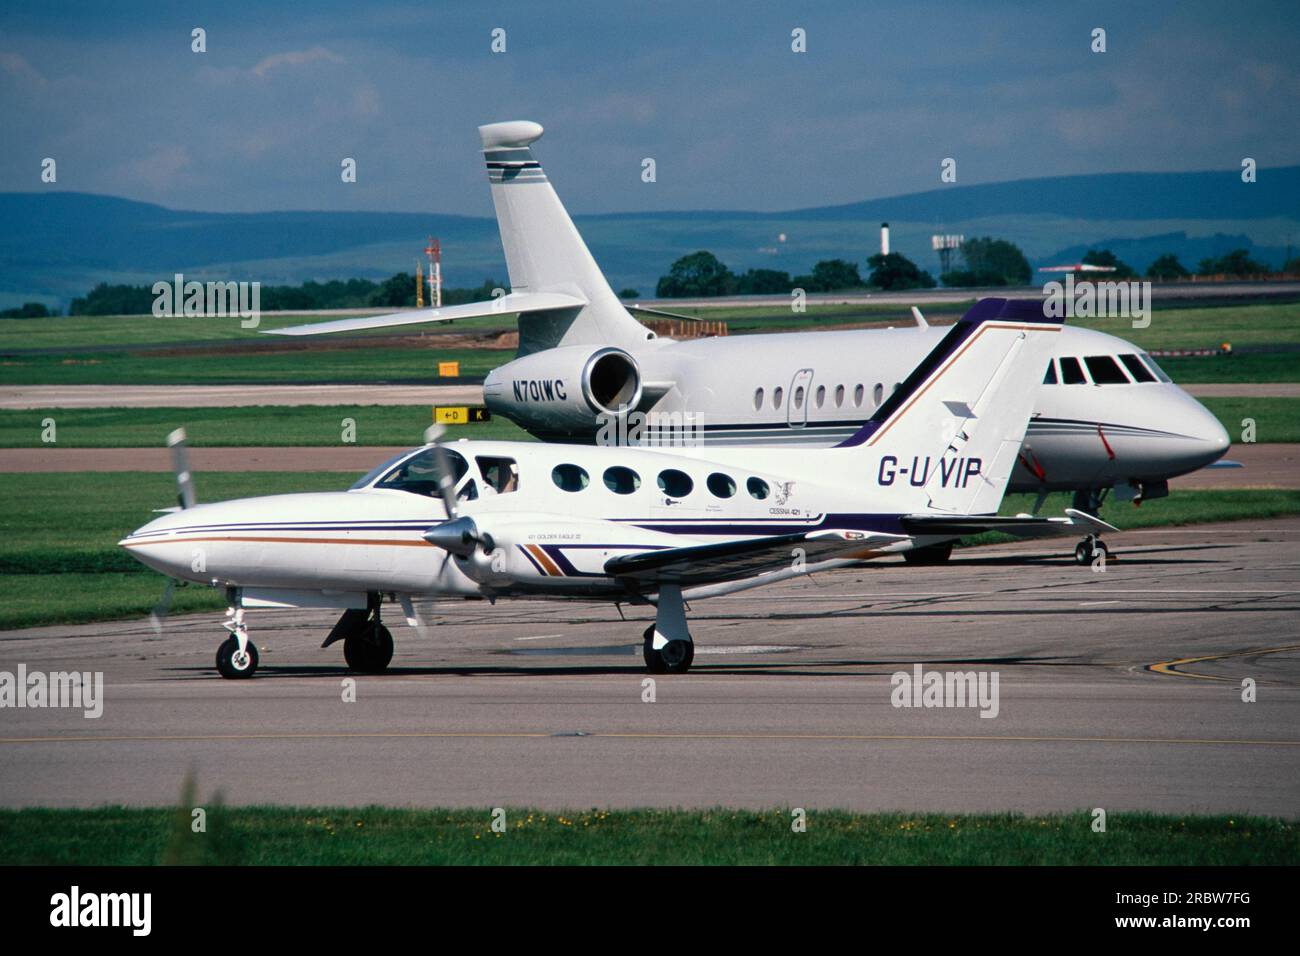 An executive, business, private Jet aircraft, a Dassault Falcon 50, registered in the USA as N701WC, together with a Cessna 421C twin engined business turbo prop aircraft, registered in UK as G-UVIP. Stock Photo